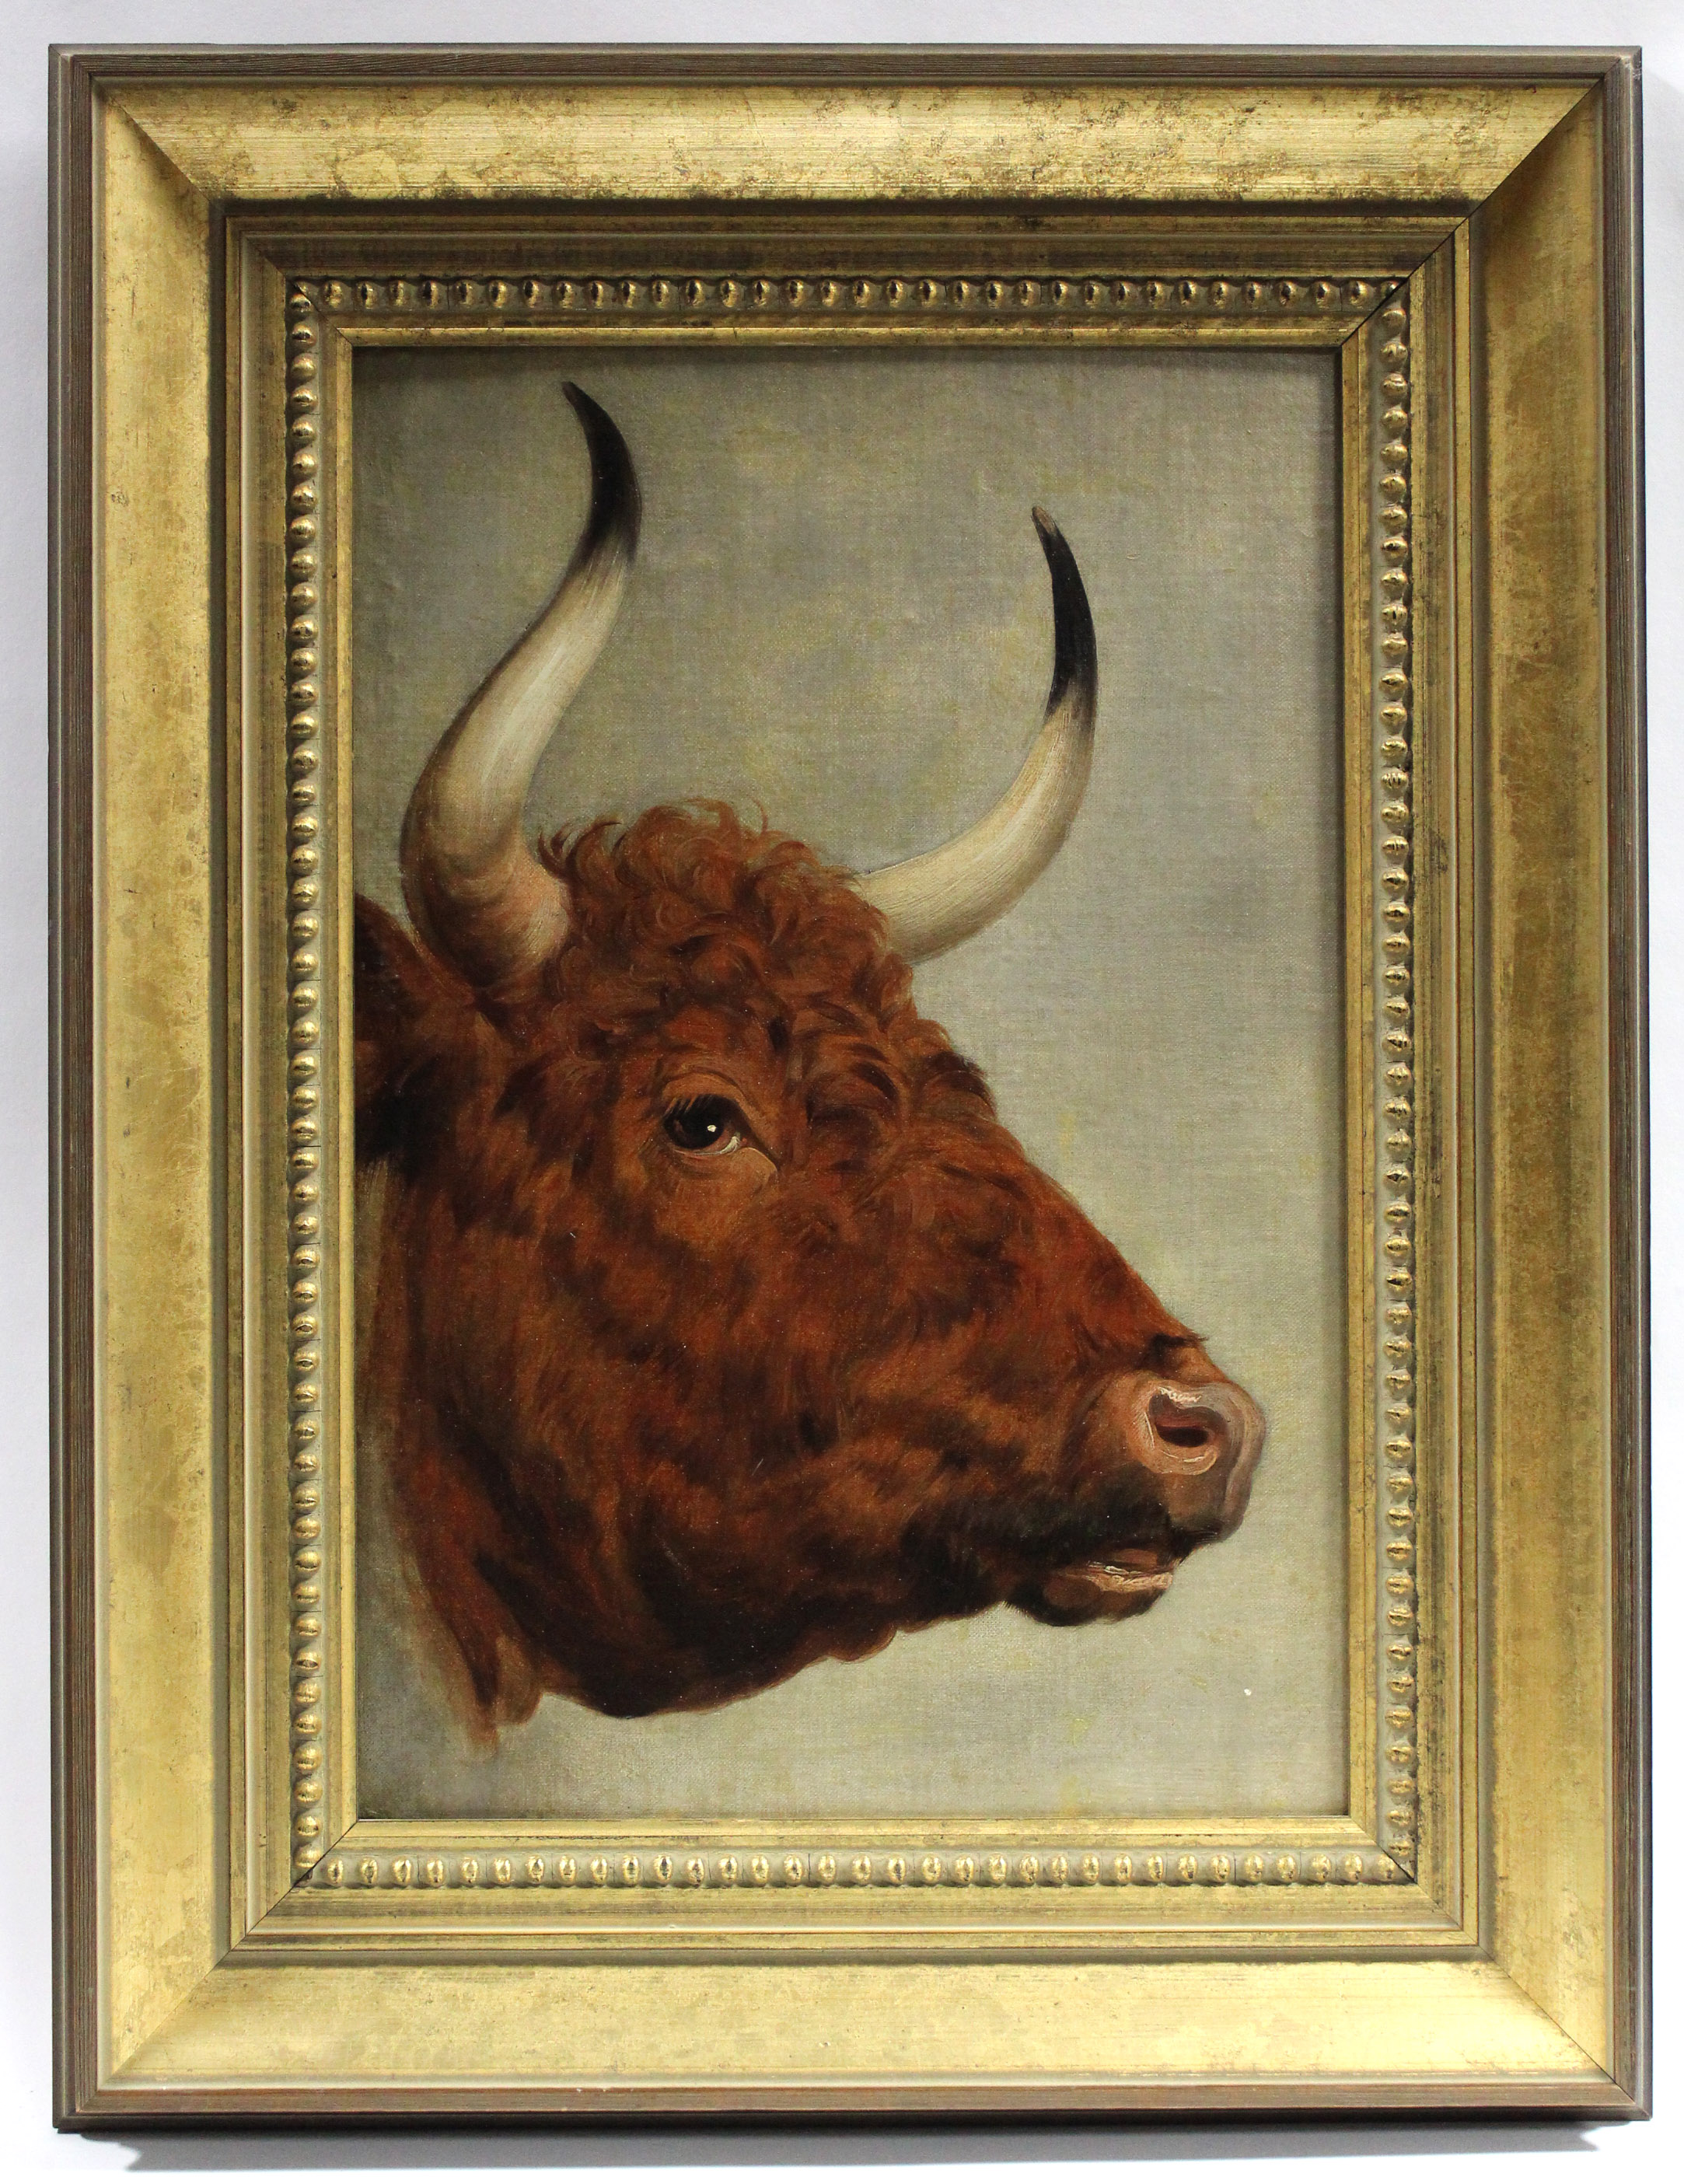 ENGLISH SCHOOL, 19th century. Portrait study of an ox. Unsigned, oil on canvas laid on wooden panel